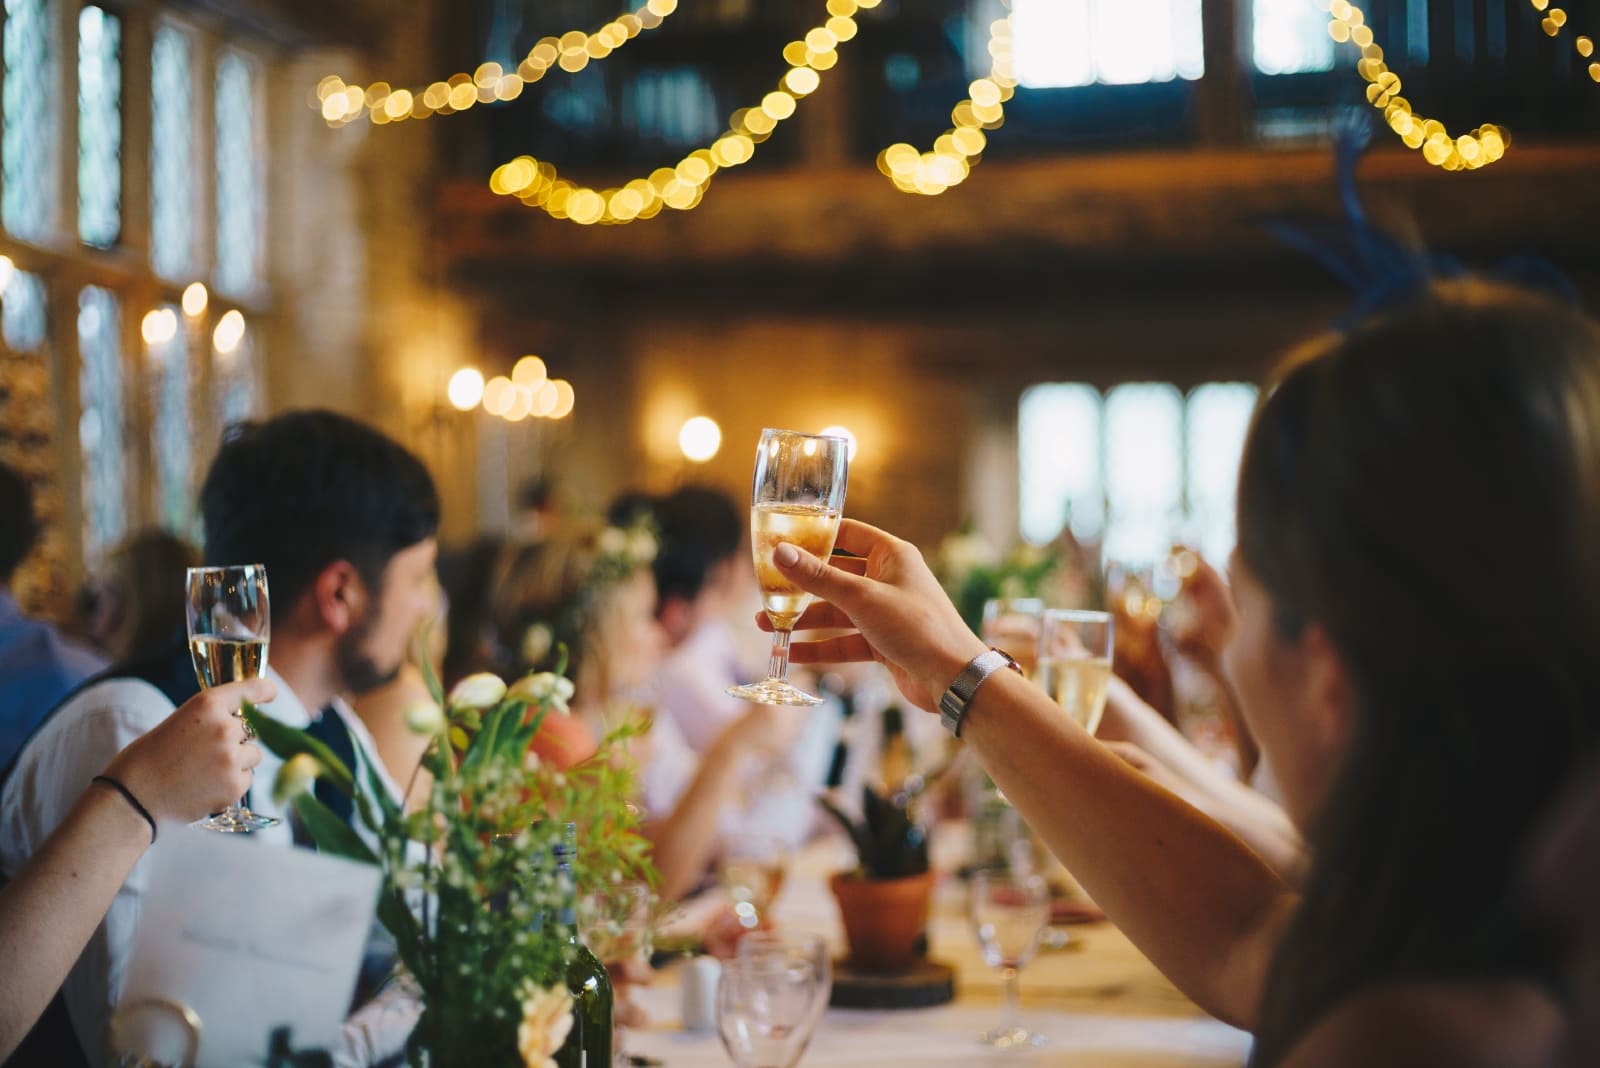 people raising glasses of wine while sitting at table